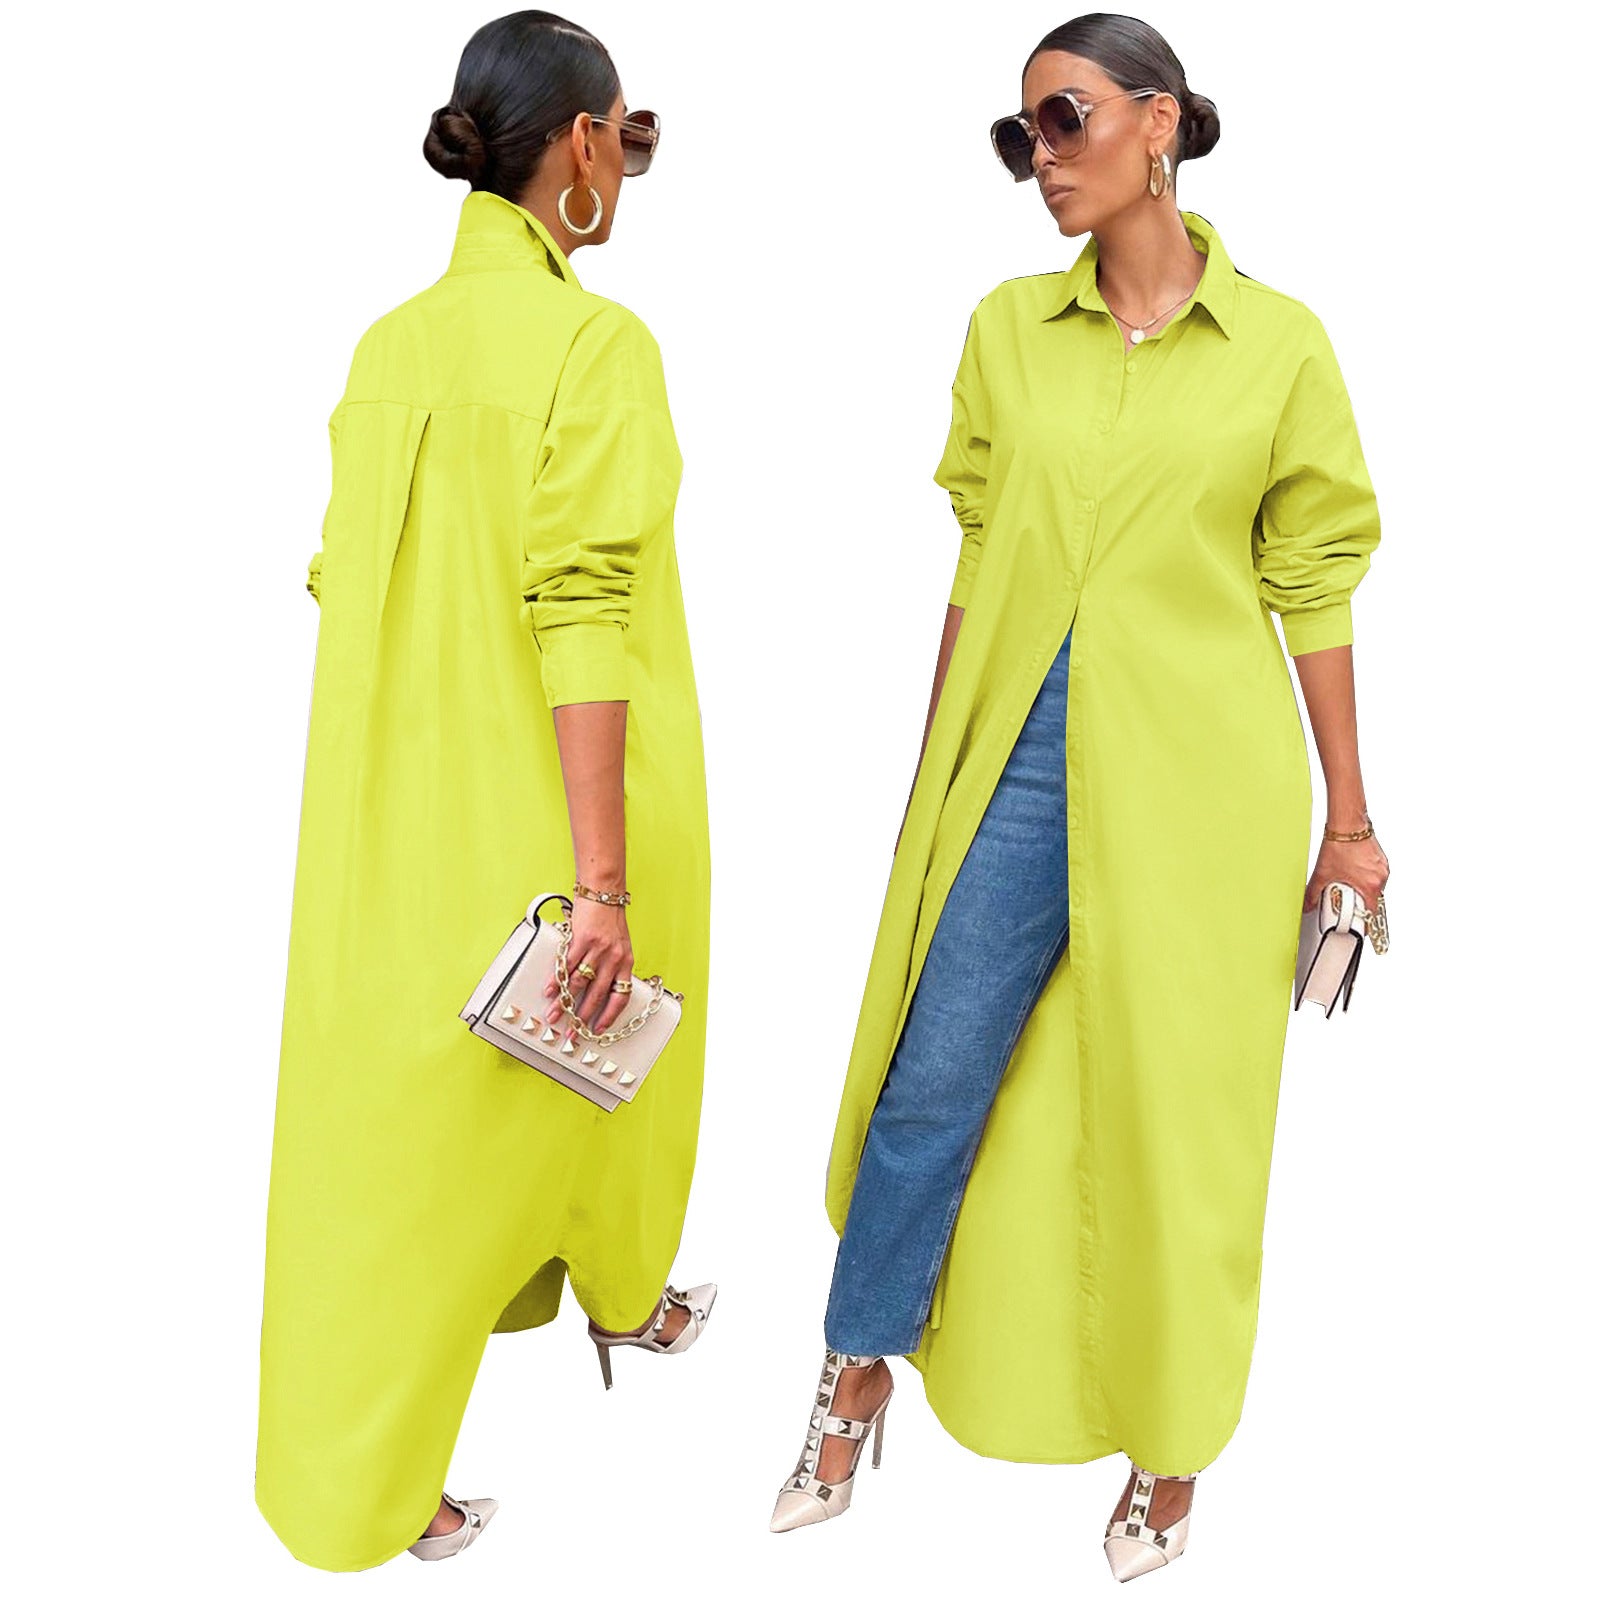 Women's Fashion Casual Solid Color Long Shirt Blouses